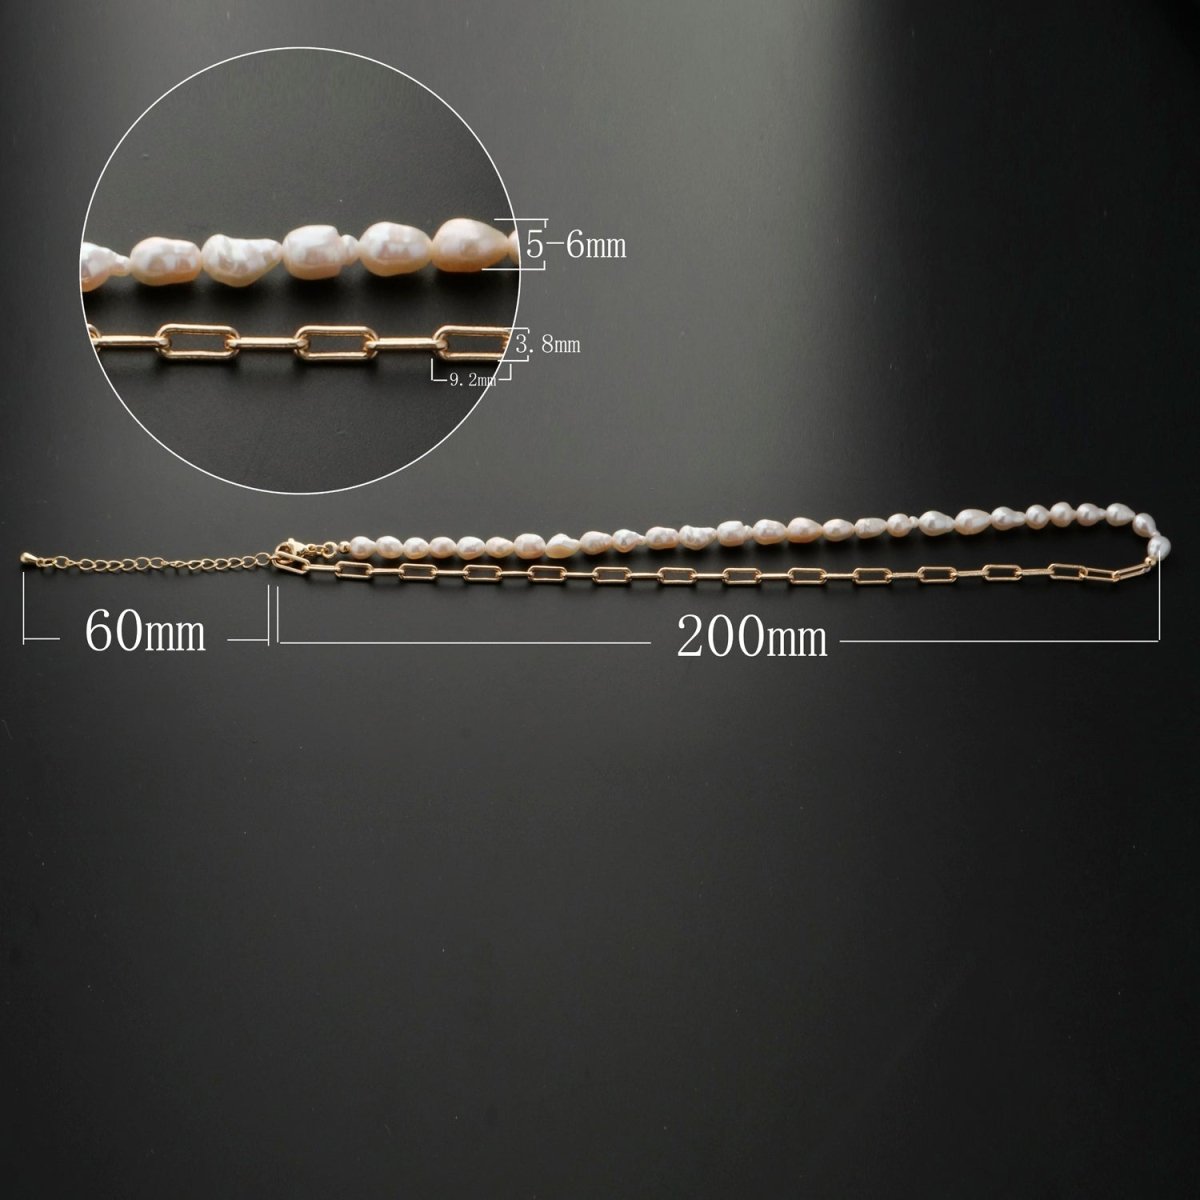 18k Gold Filled Freshwater Pearl Half Chain Necklace Paper Clip Link 16 inch + 2" extender Length Handmade Minimalist Jewelry | WA-331 Clearance Pricing - DLUXCA